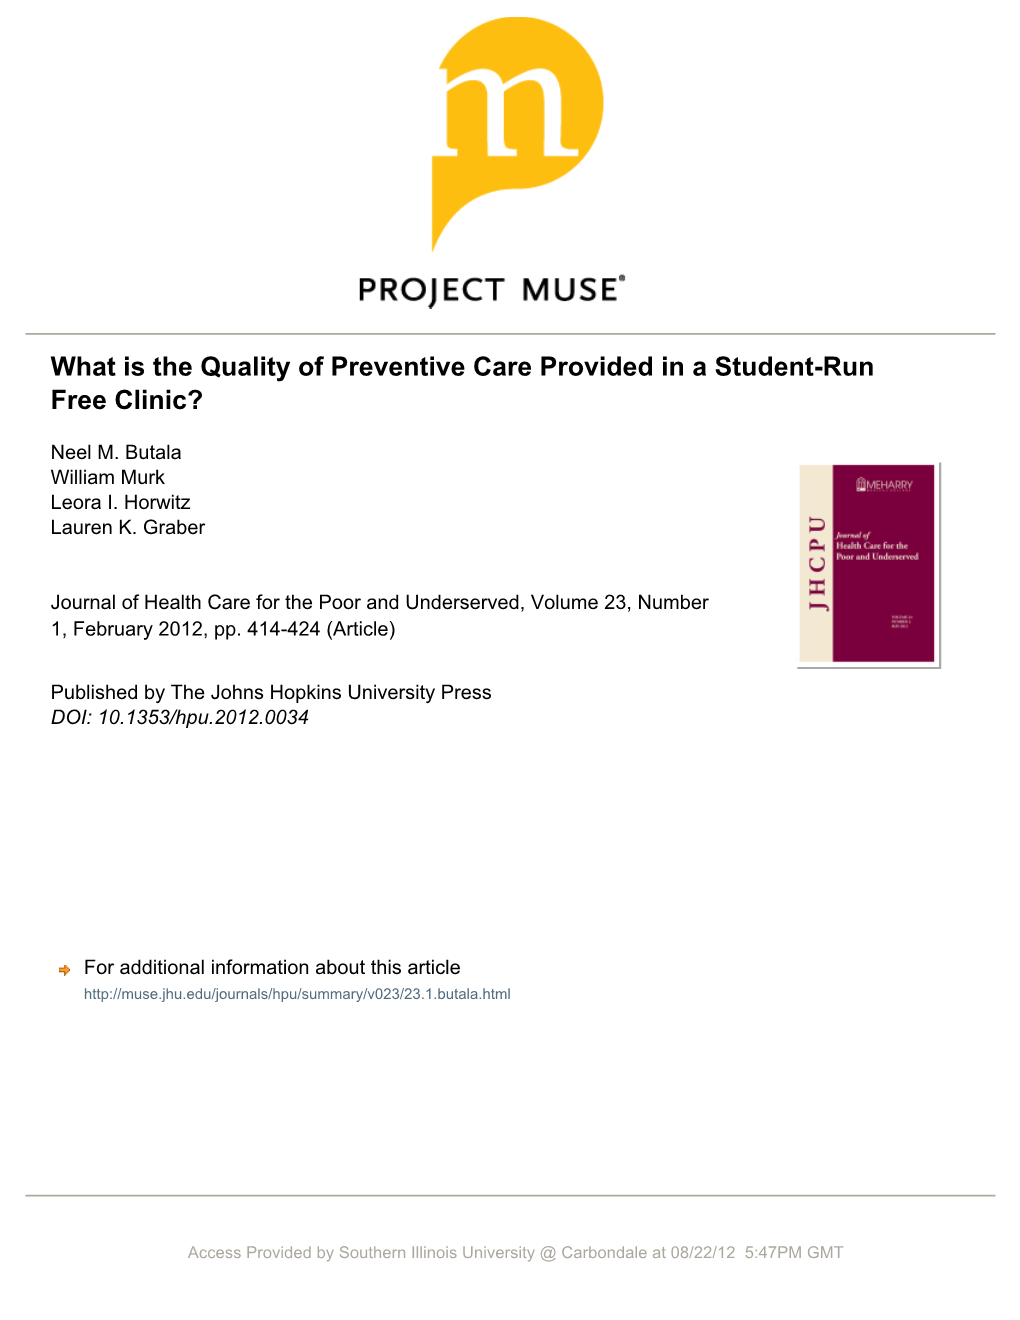 What Is the Quality of Preventative Care Provided in a Student Run Free Clinic